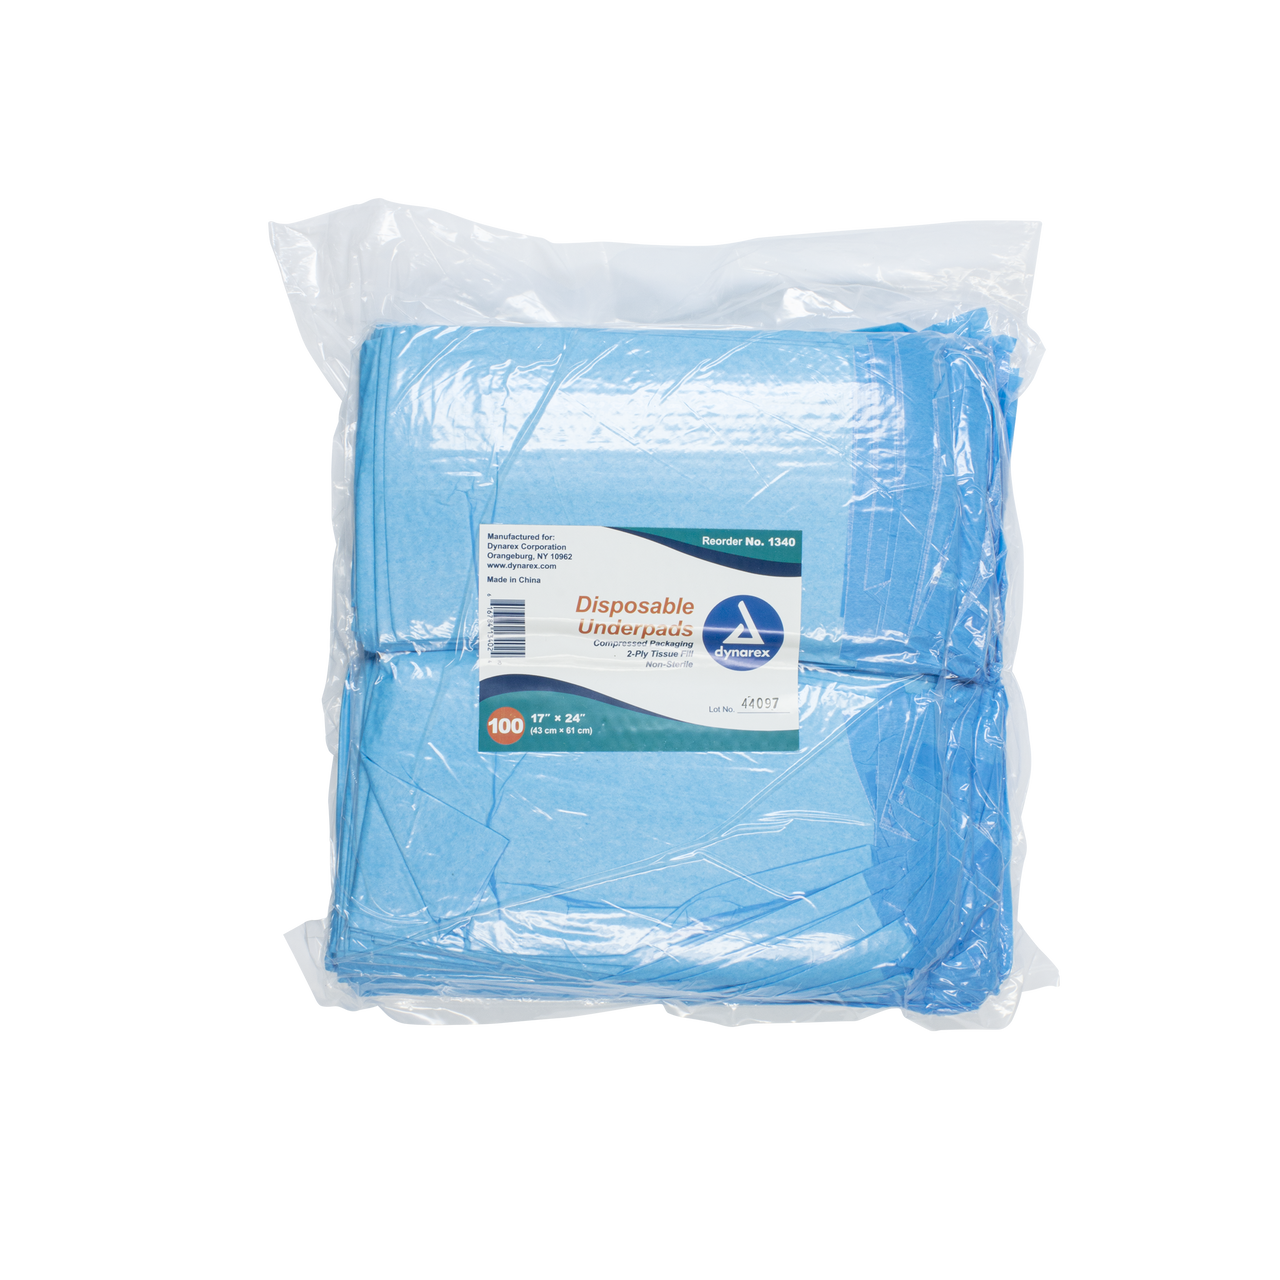 FitRight Super Adult Incontinence Underwear - Maximum Absorbency Case